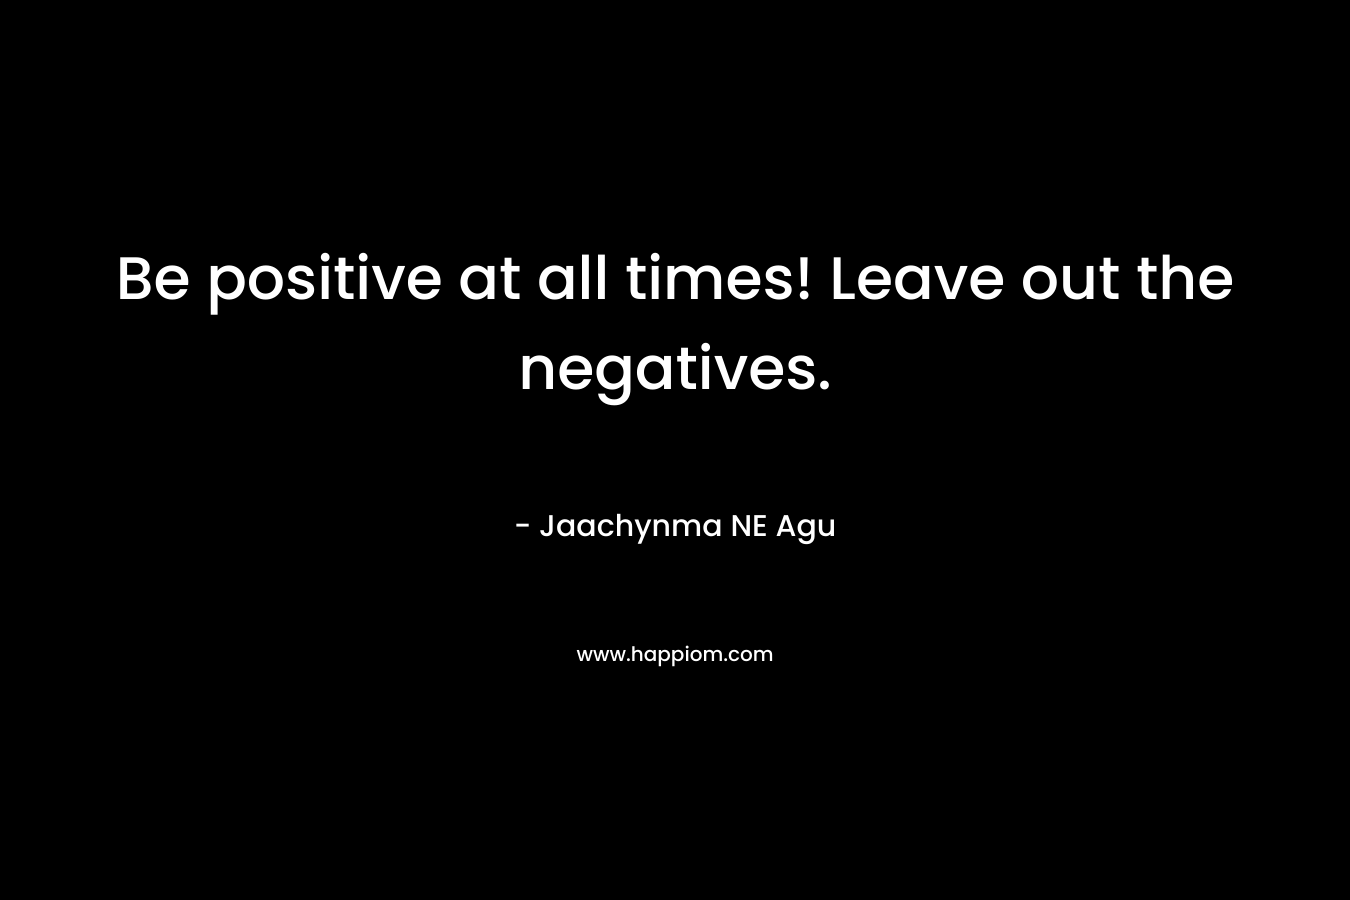 Be positive at all times! Leave out the negatives.